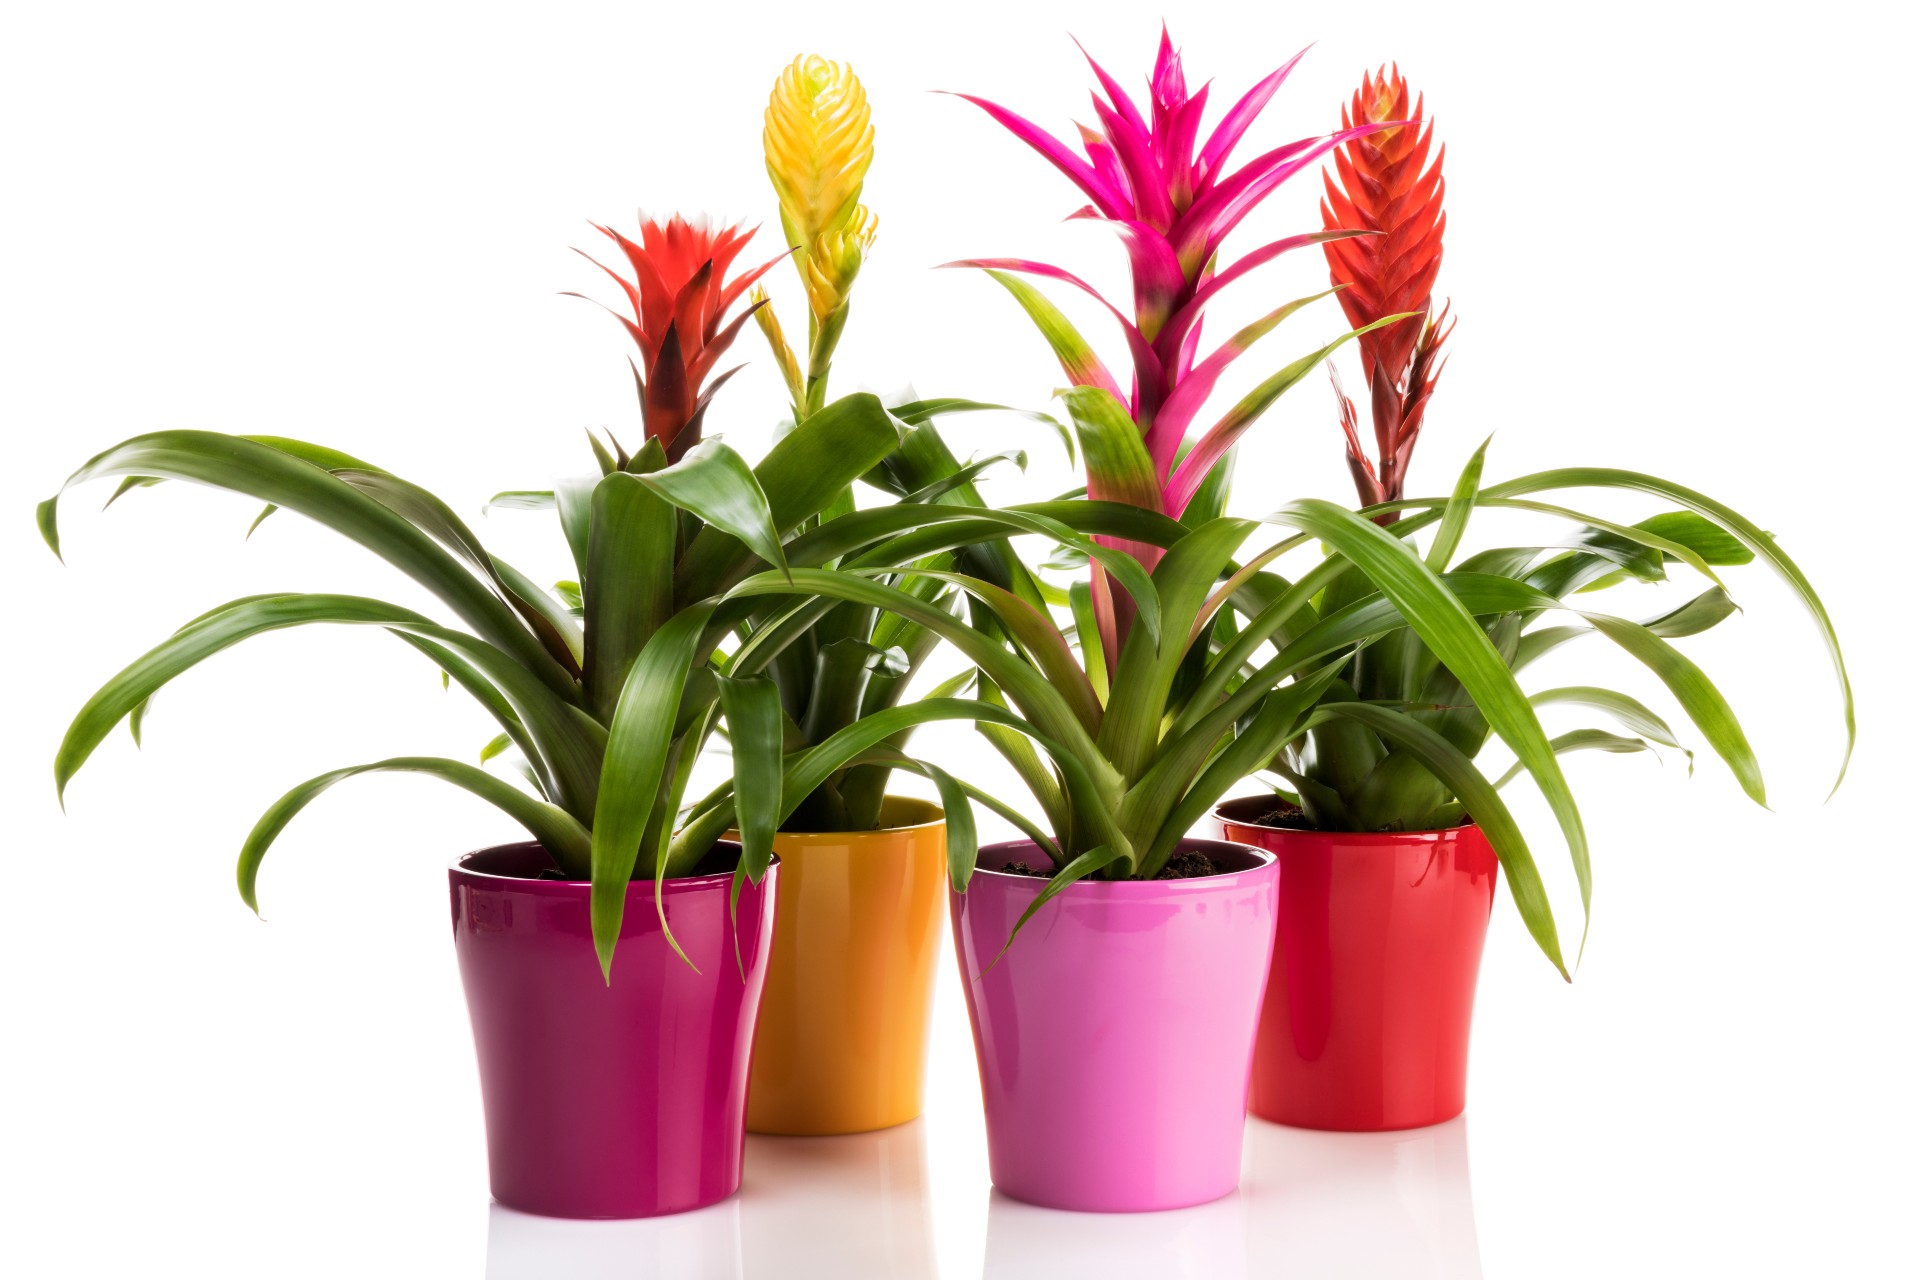  How often do bromeliads flower? How to help these blooms thrive